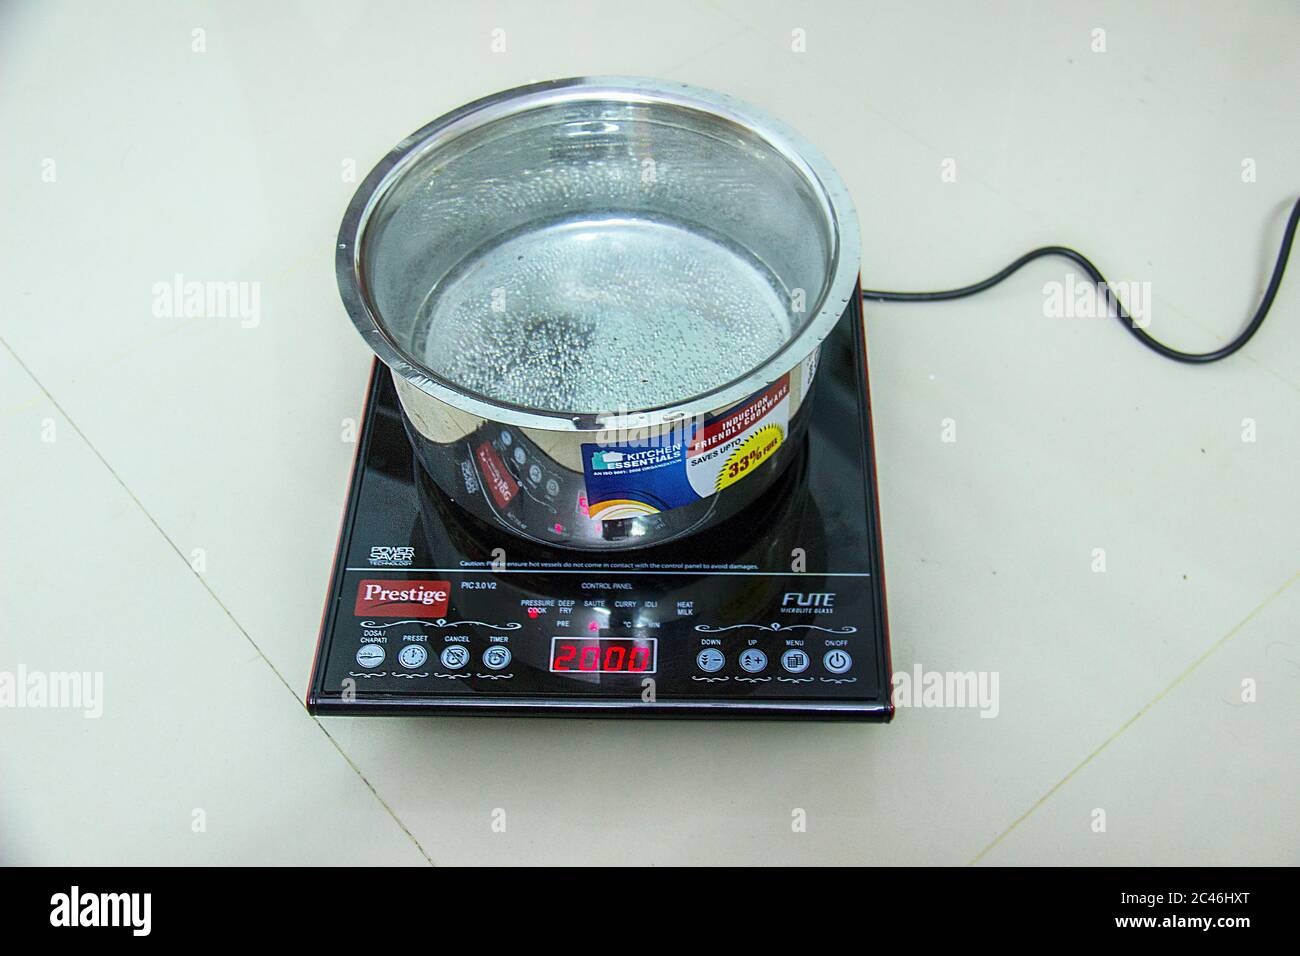 Steaming Pot Of Boiling Water On Red Hot Electric Stove Burner